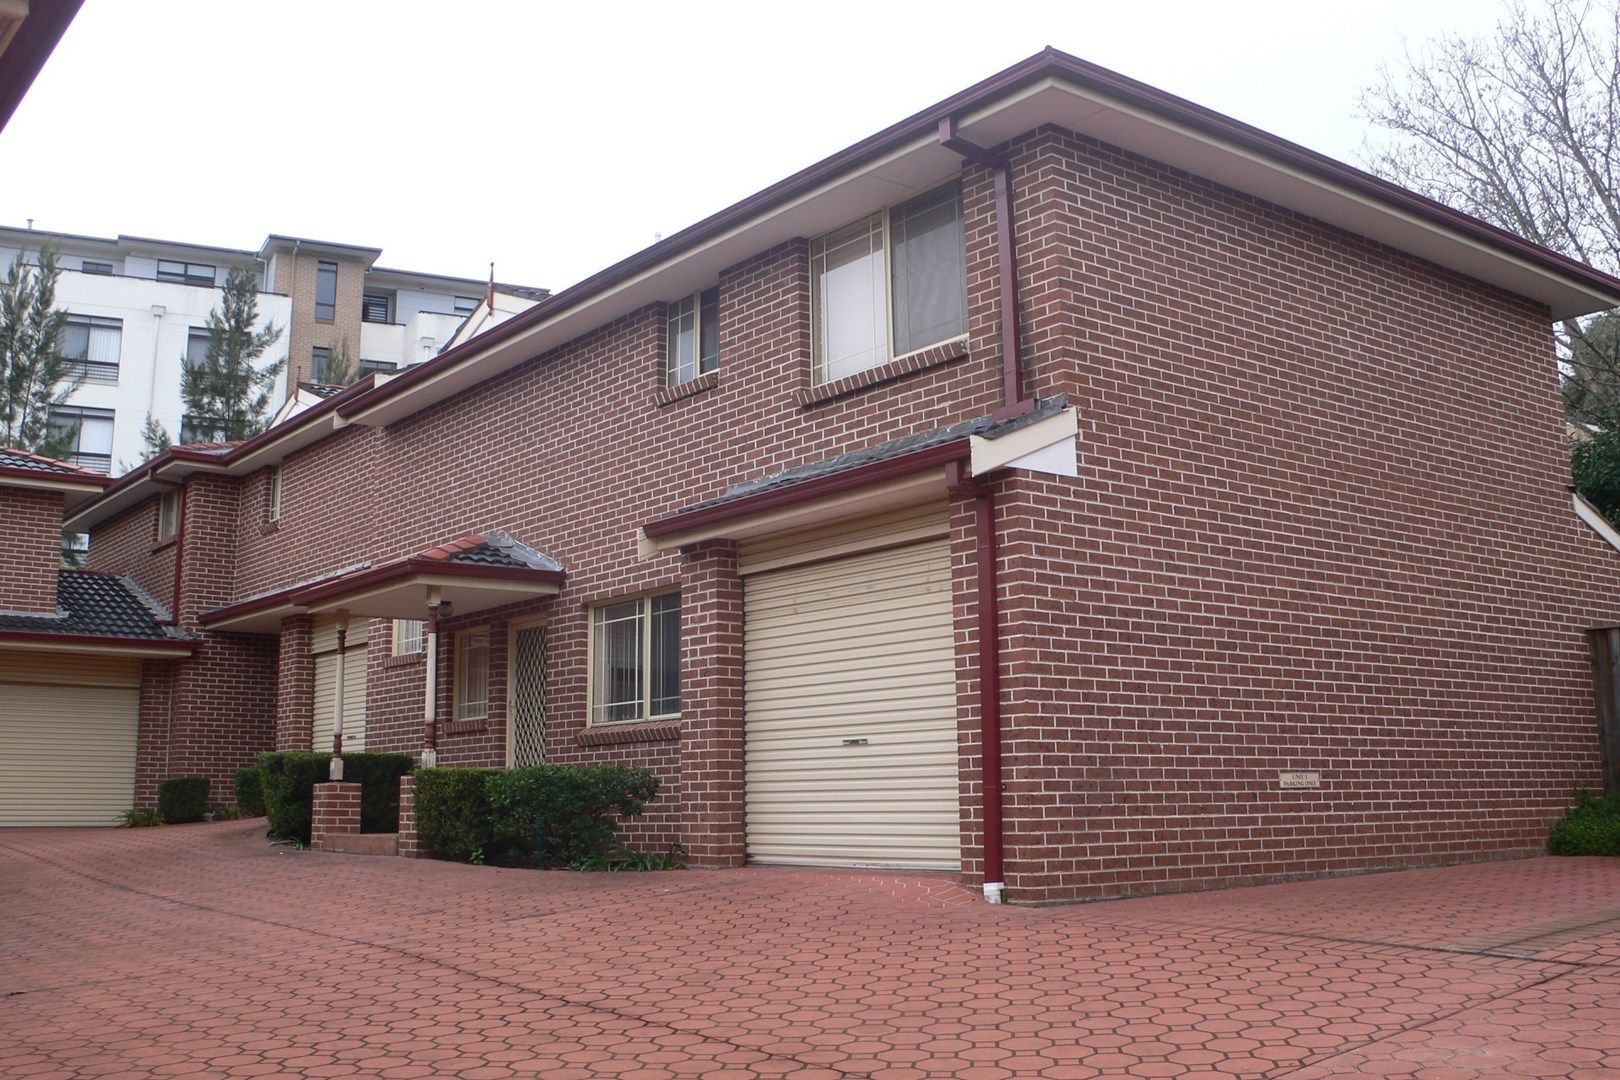 3 bedrooms Townhouse in 5/6 Parsonage Road CASTLE HILL NSW, 2154